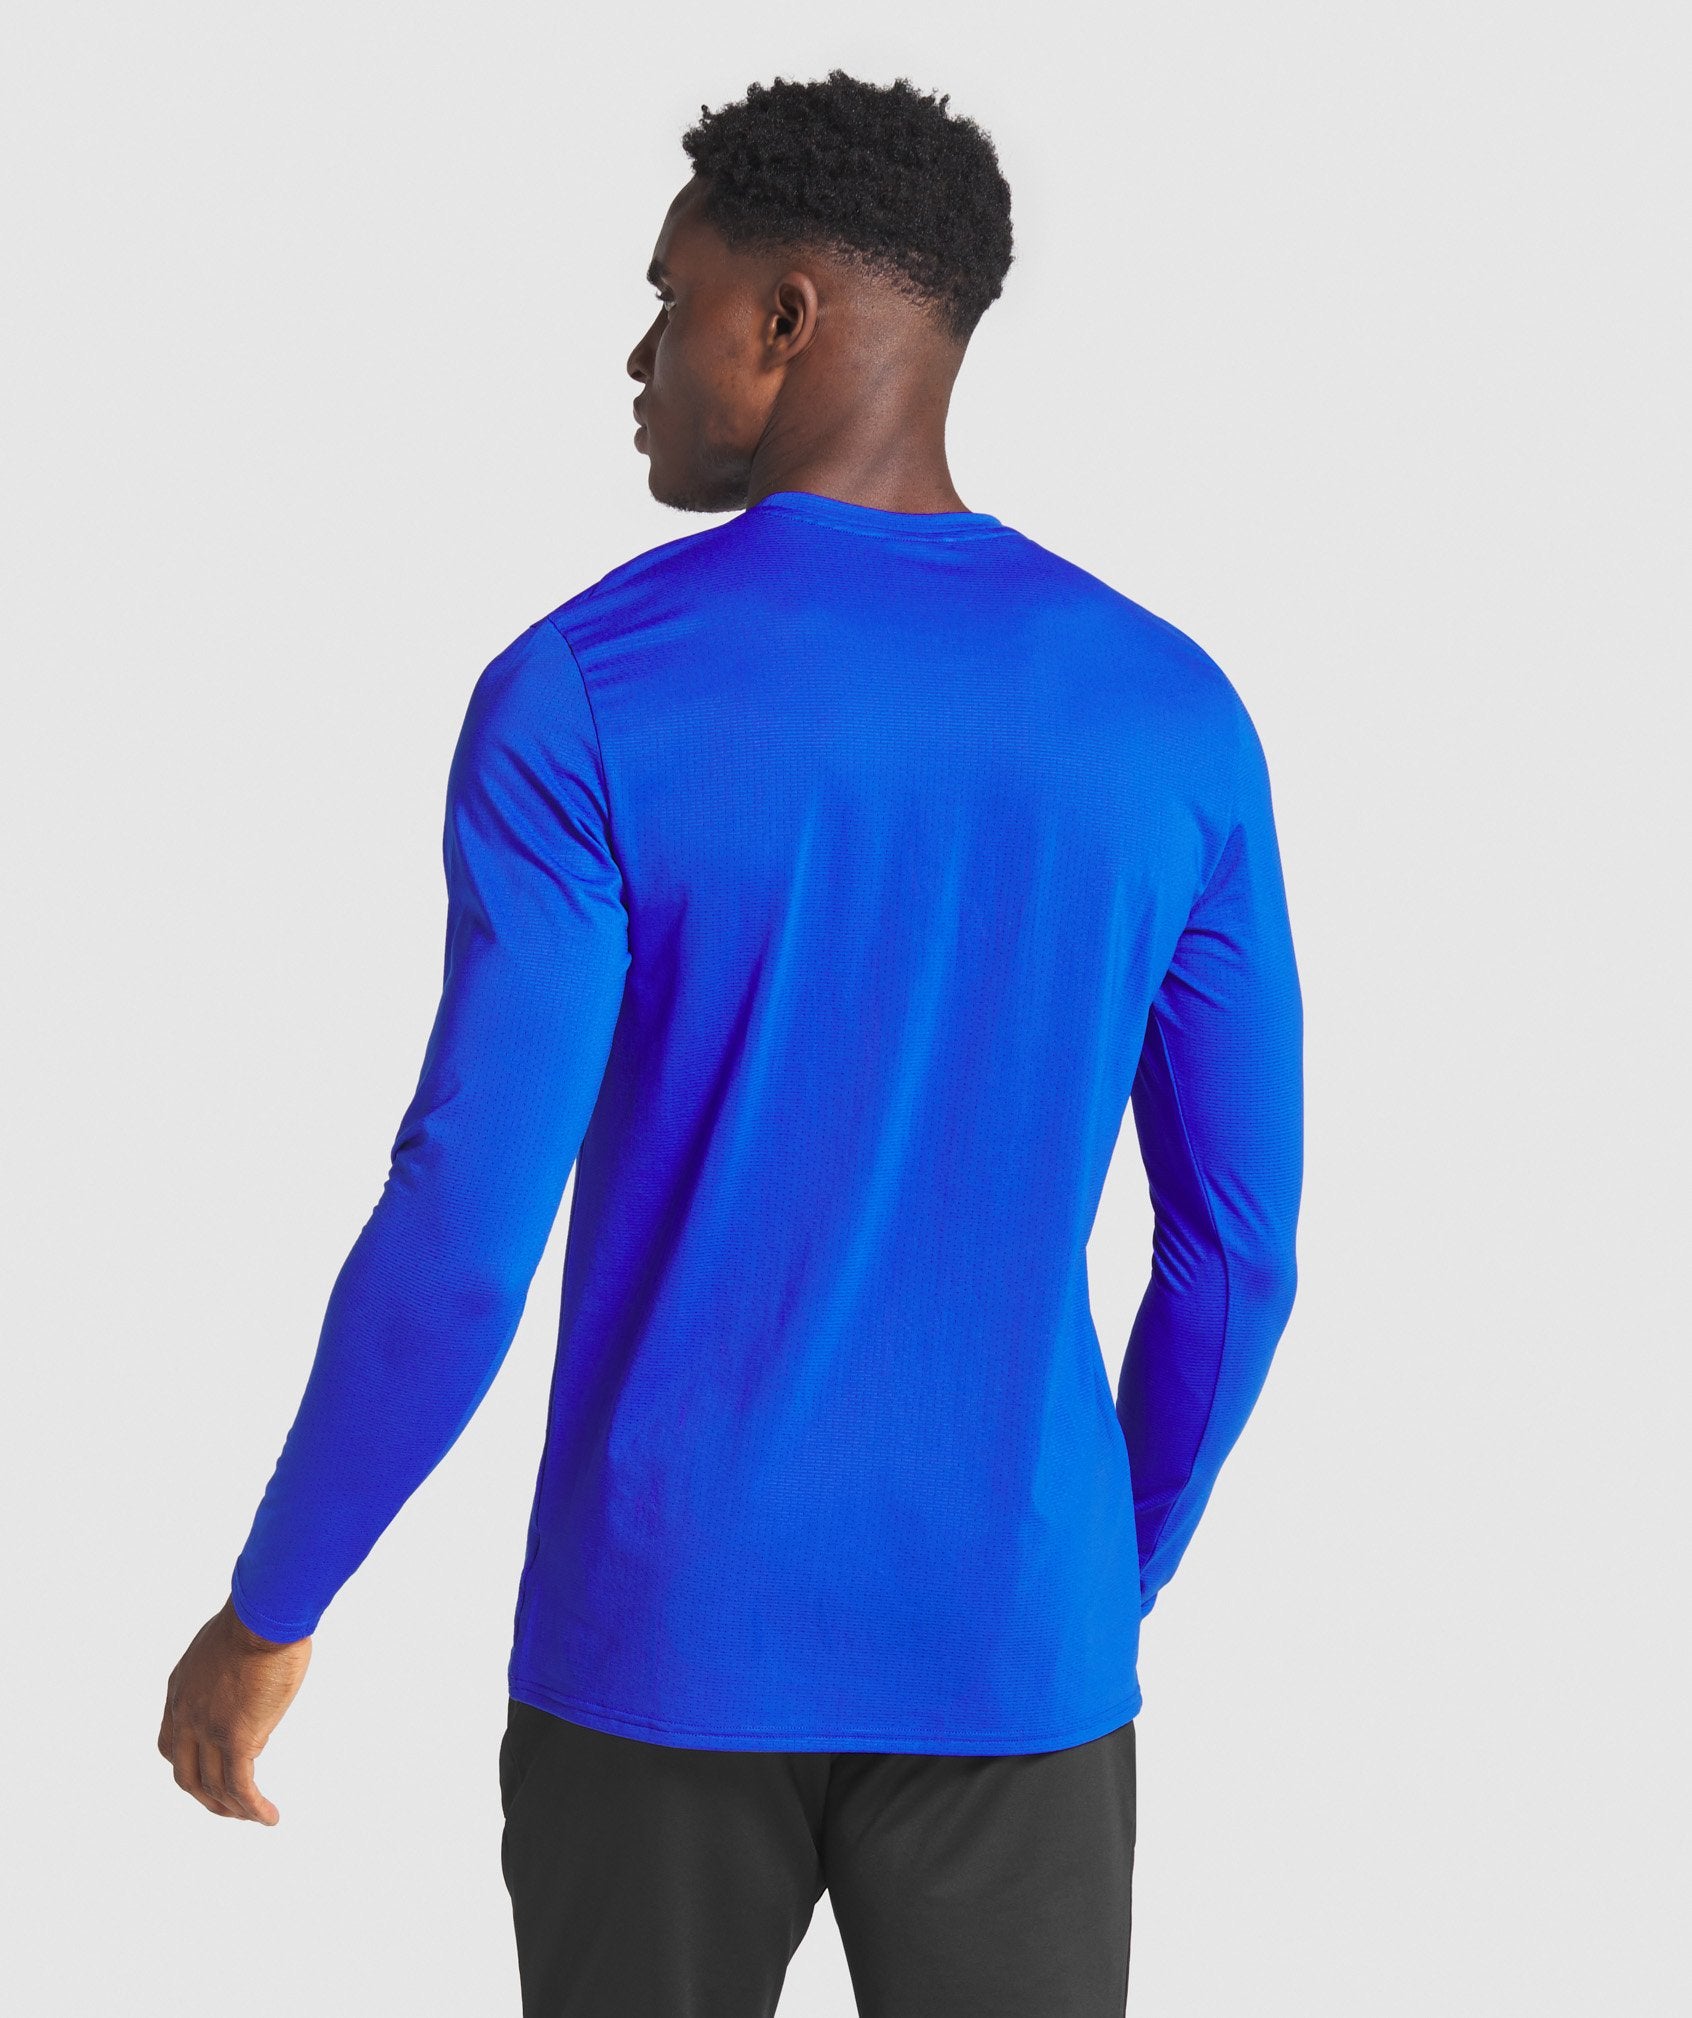 Arrival Long Sleeve Graphic T-Shirt in Blue - view 3